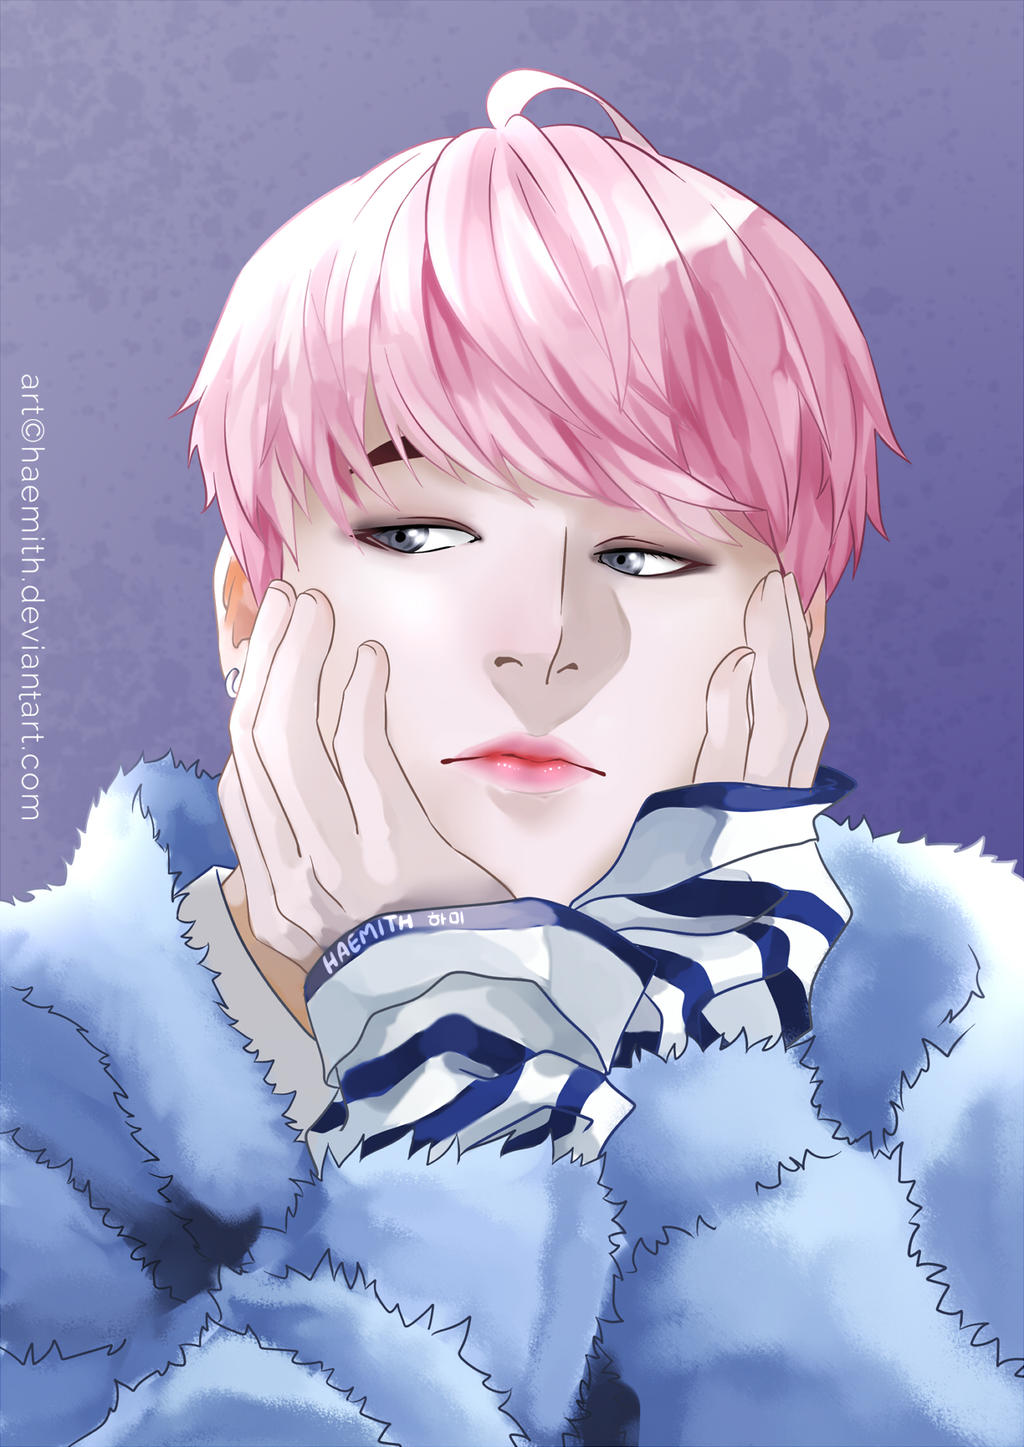 Spring Day: JIMIN by haemith on DeviantArt